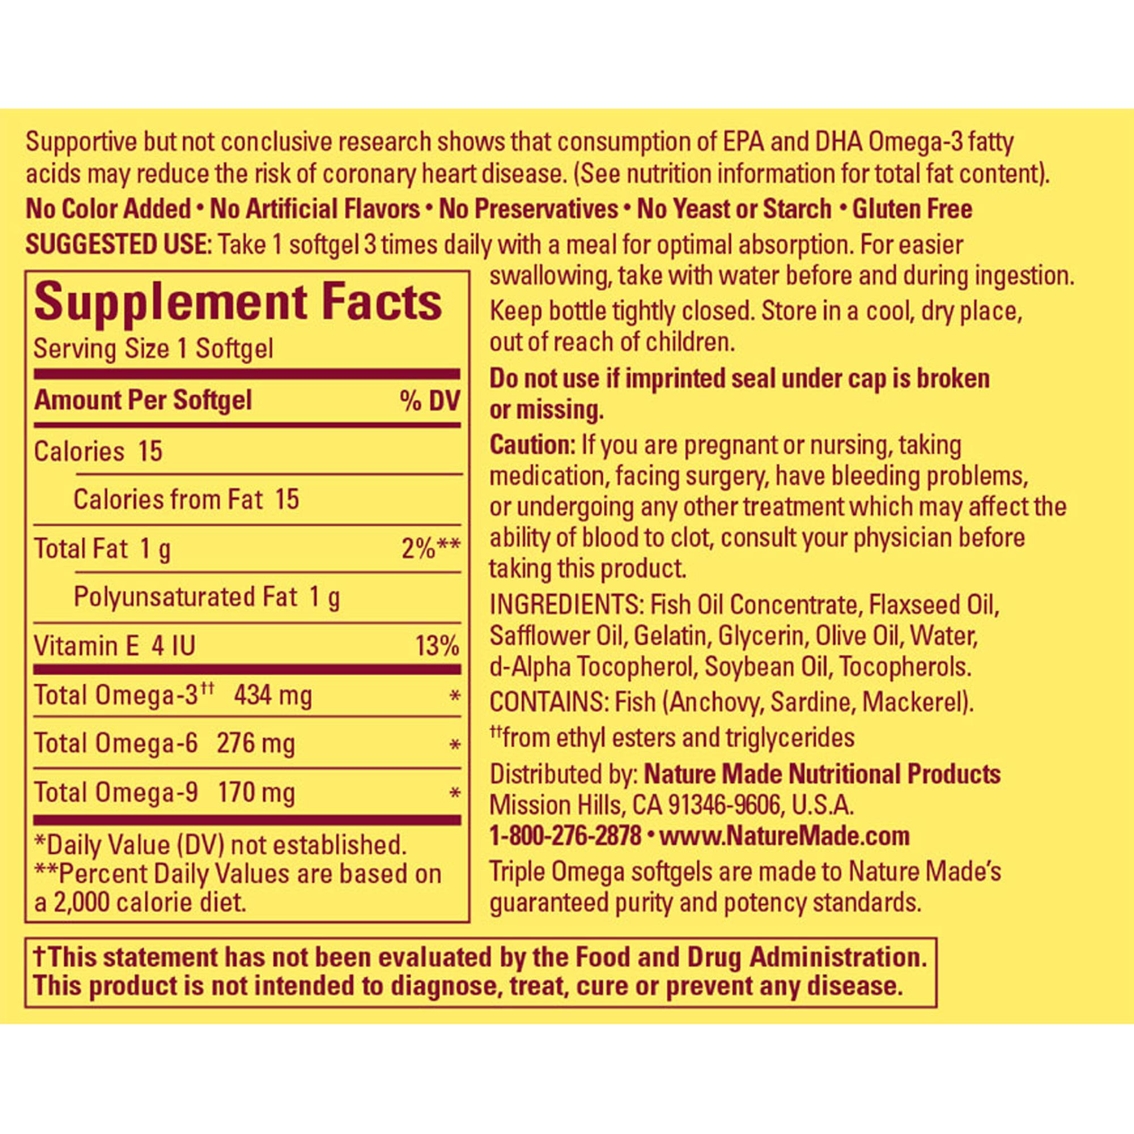 Nature Made Triple Omega 3-6-9 Softgels 150 ct. - Image 2 of 3